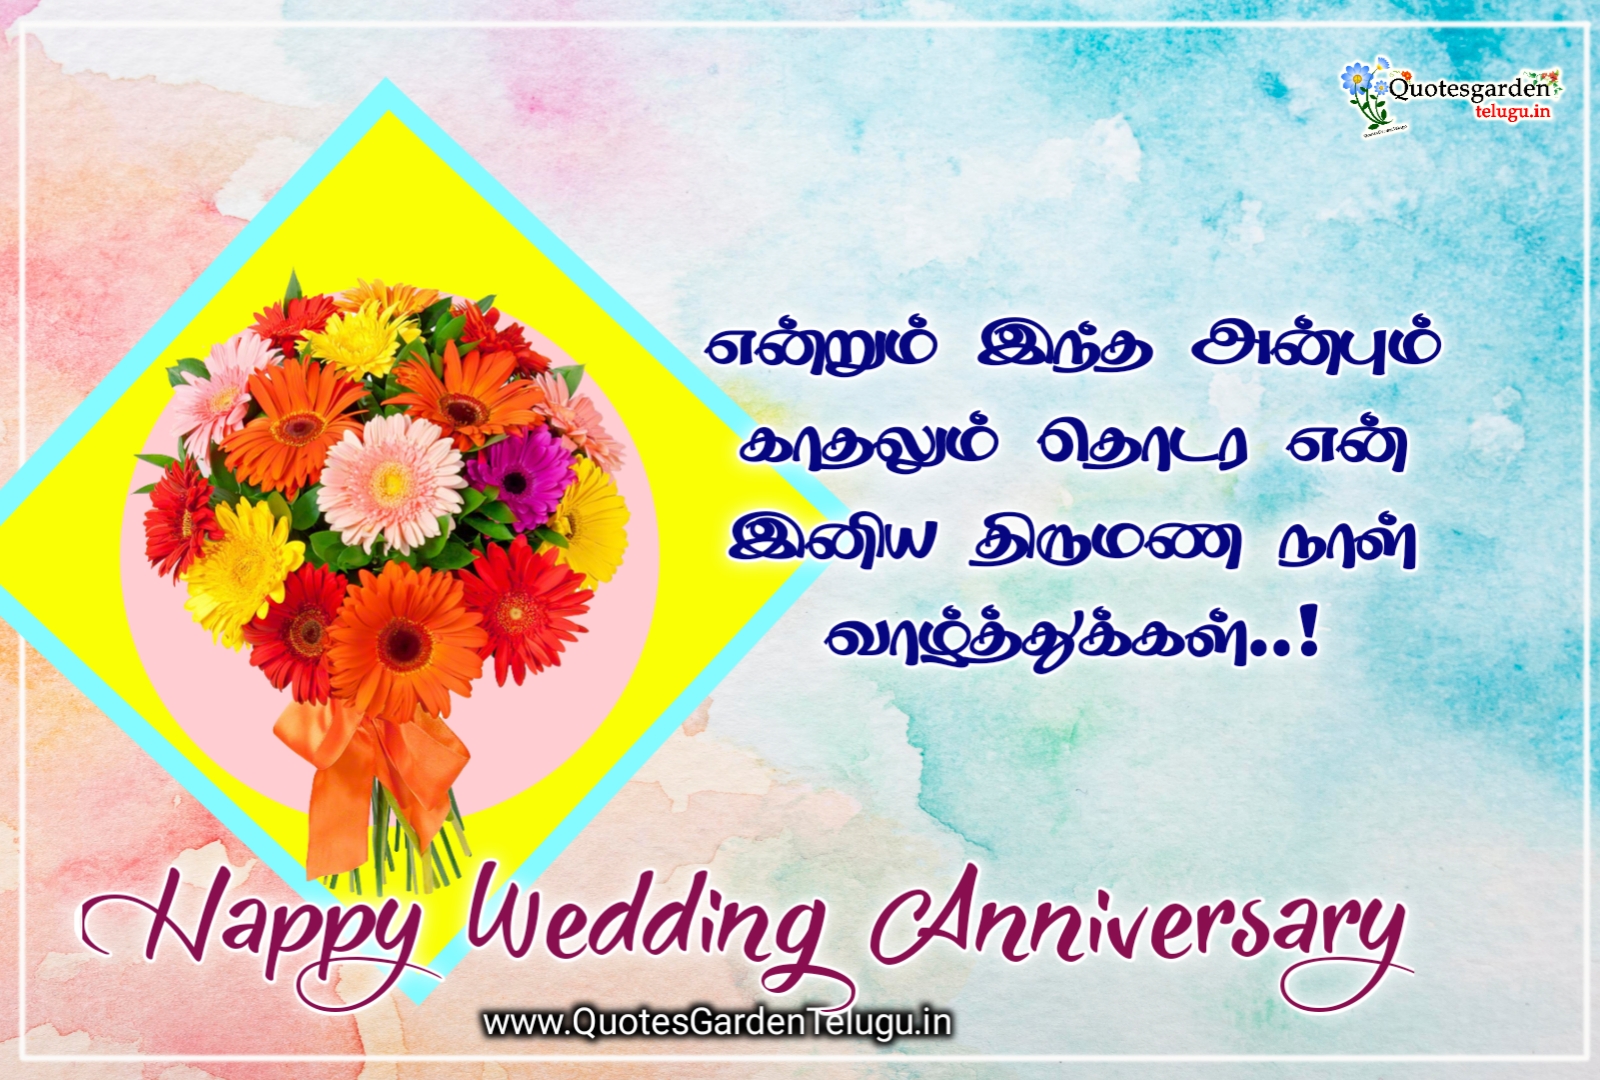 Happy marriage day greetings in Tamil | QUOTES GARDEN TELUGU ...